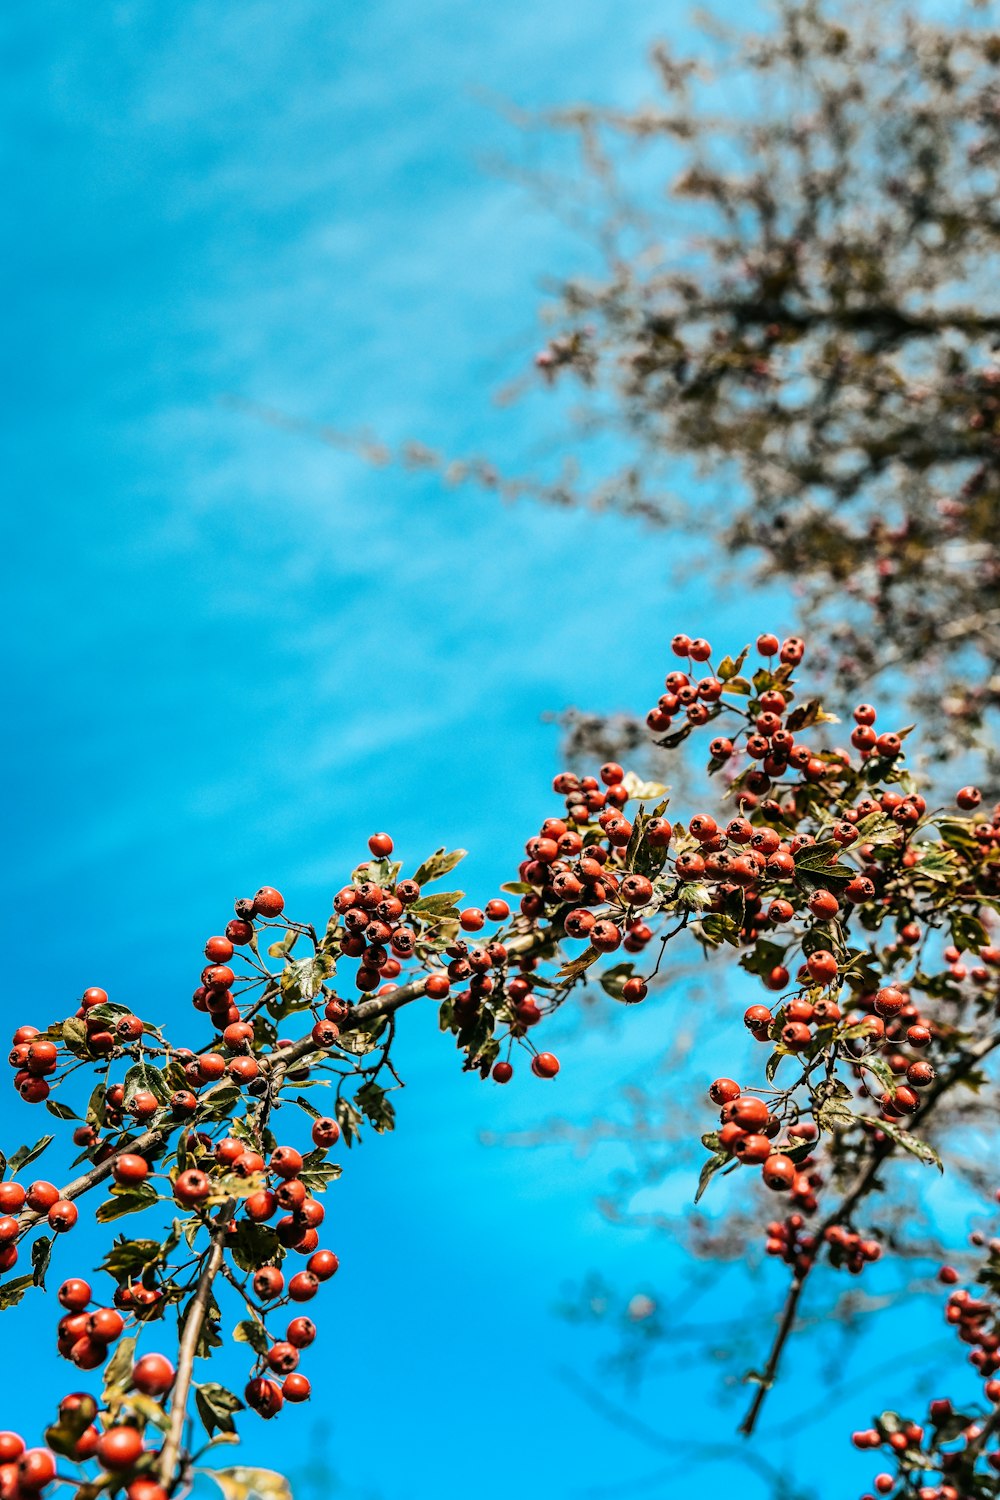 a bunch of berries on a tree with a blue sky in the background